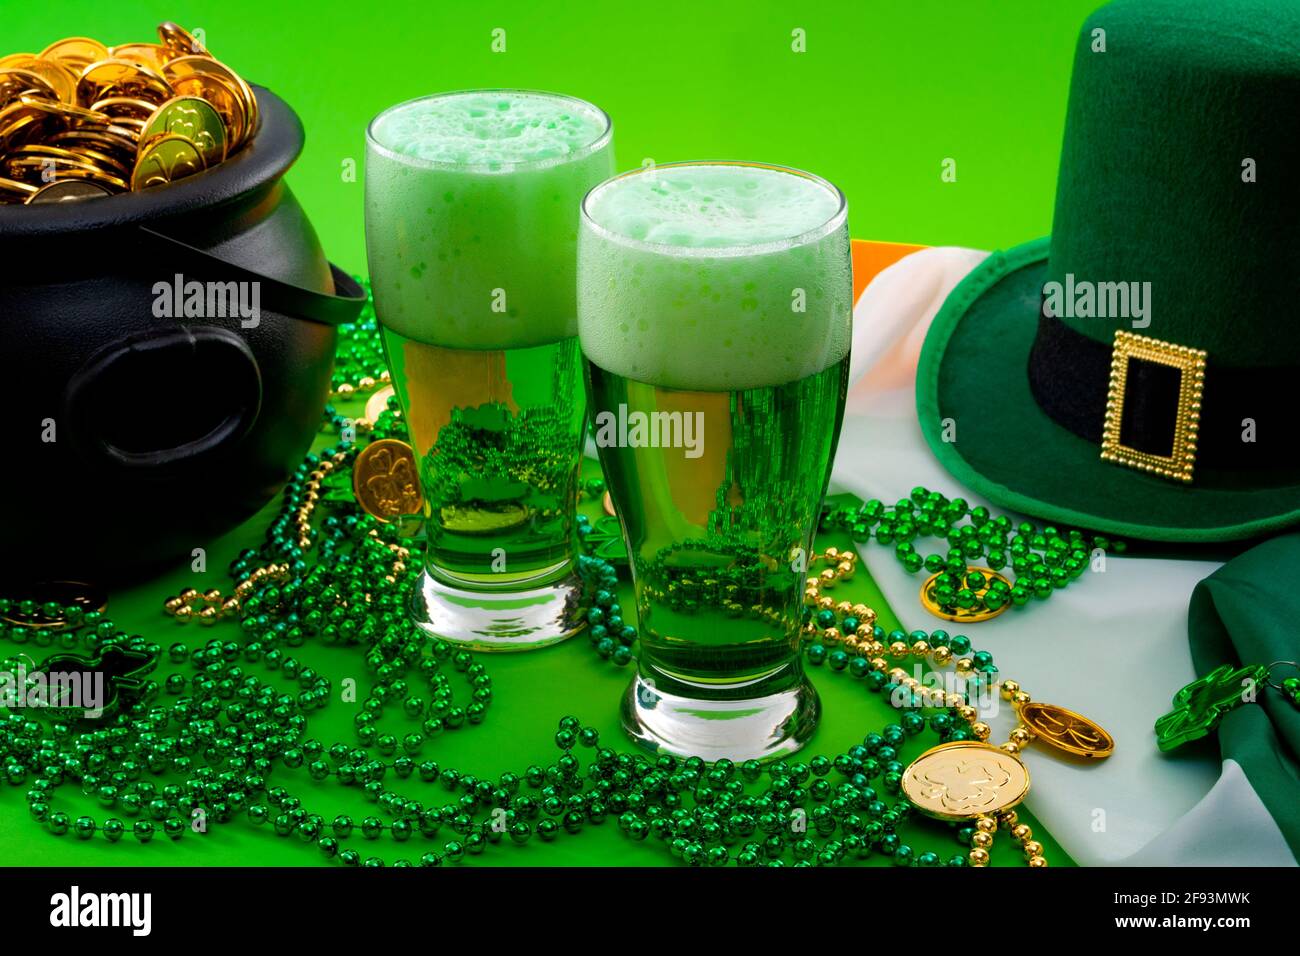 The luck of the Irish meme and Happy St Patricks day concept theme with two glasses of dyed beer, leprechaun hat, beads necklace and pot of gold coins Stock Photo